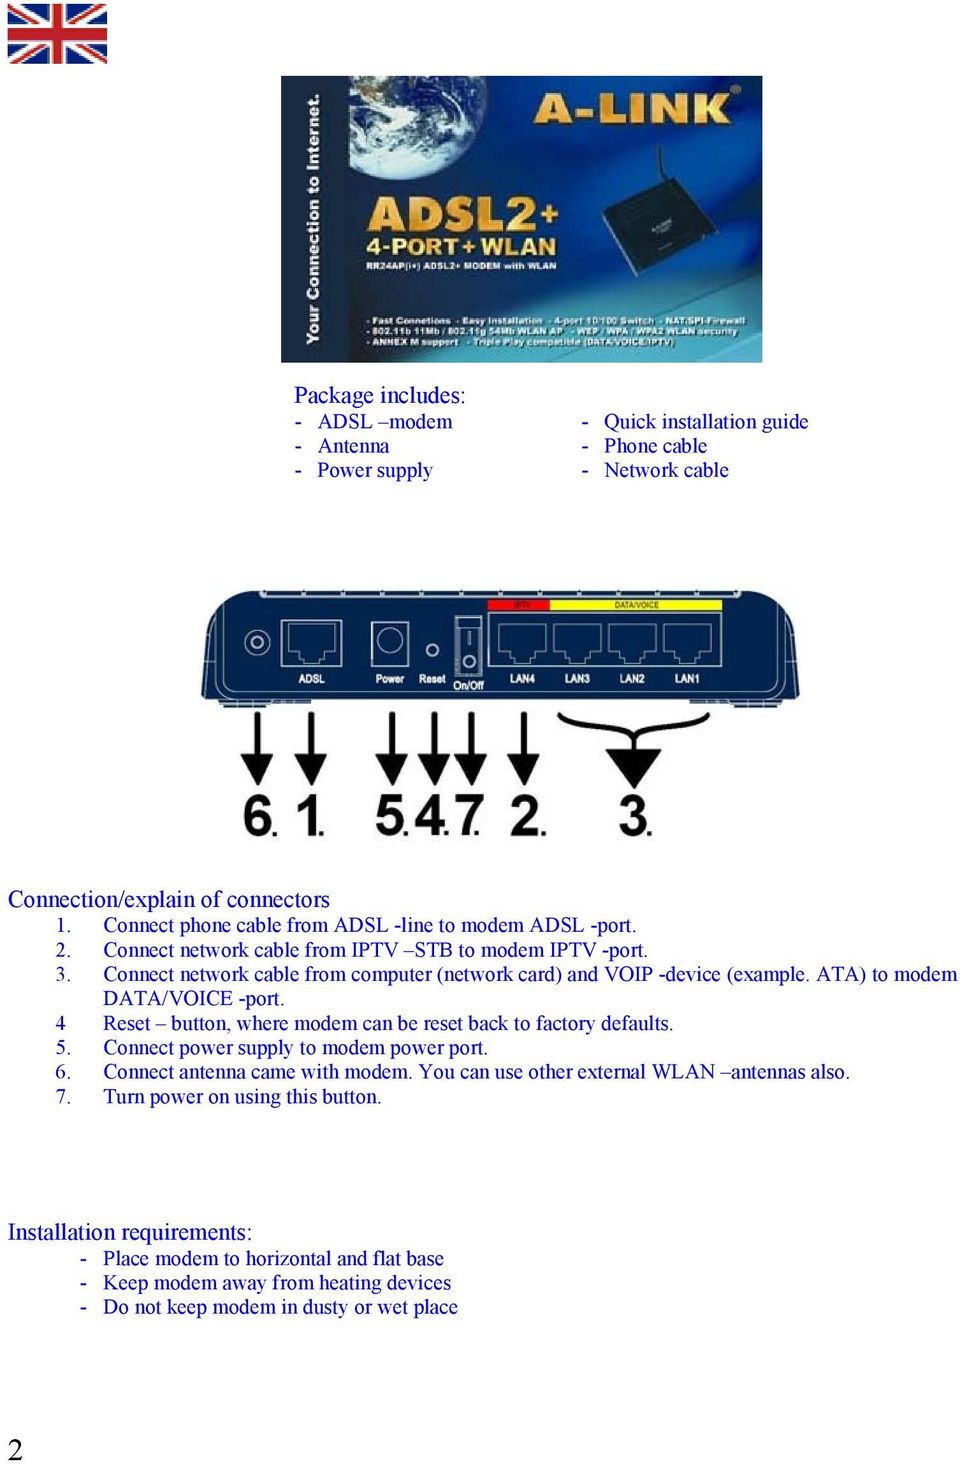 Connect network cable from computer (network card) and VOIP -device (example. ATA) to modem DATA/VOICE -port. 4 Reset button, where modem can be reset back to factory defaults. 5.